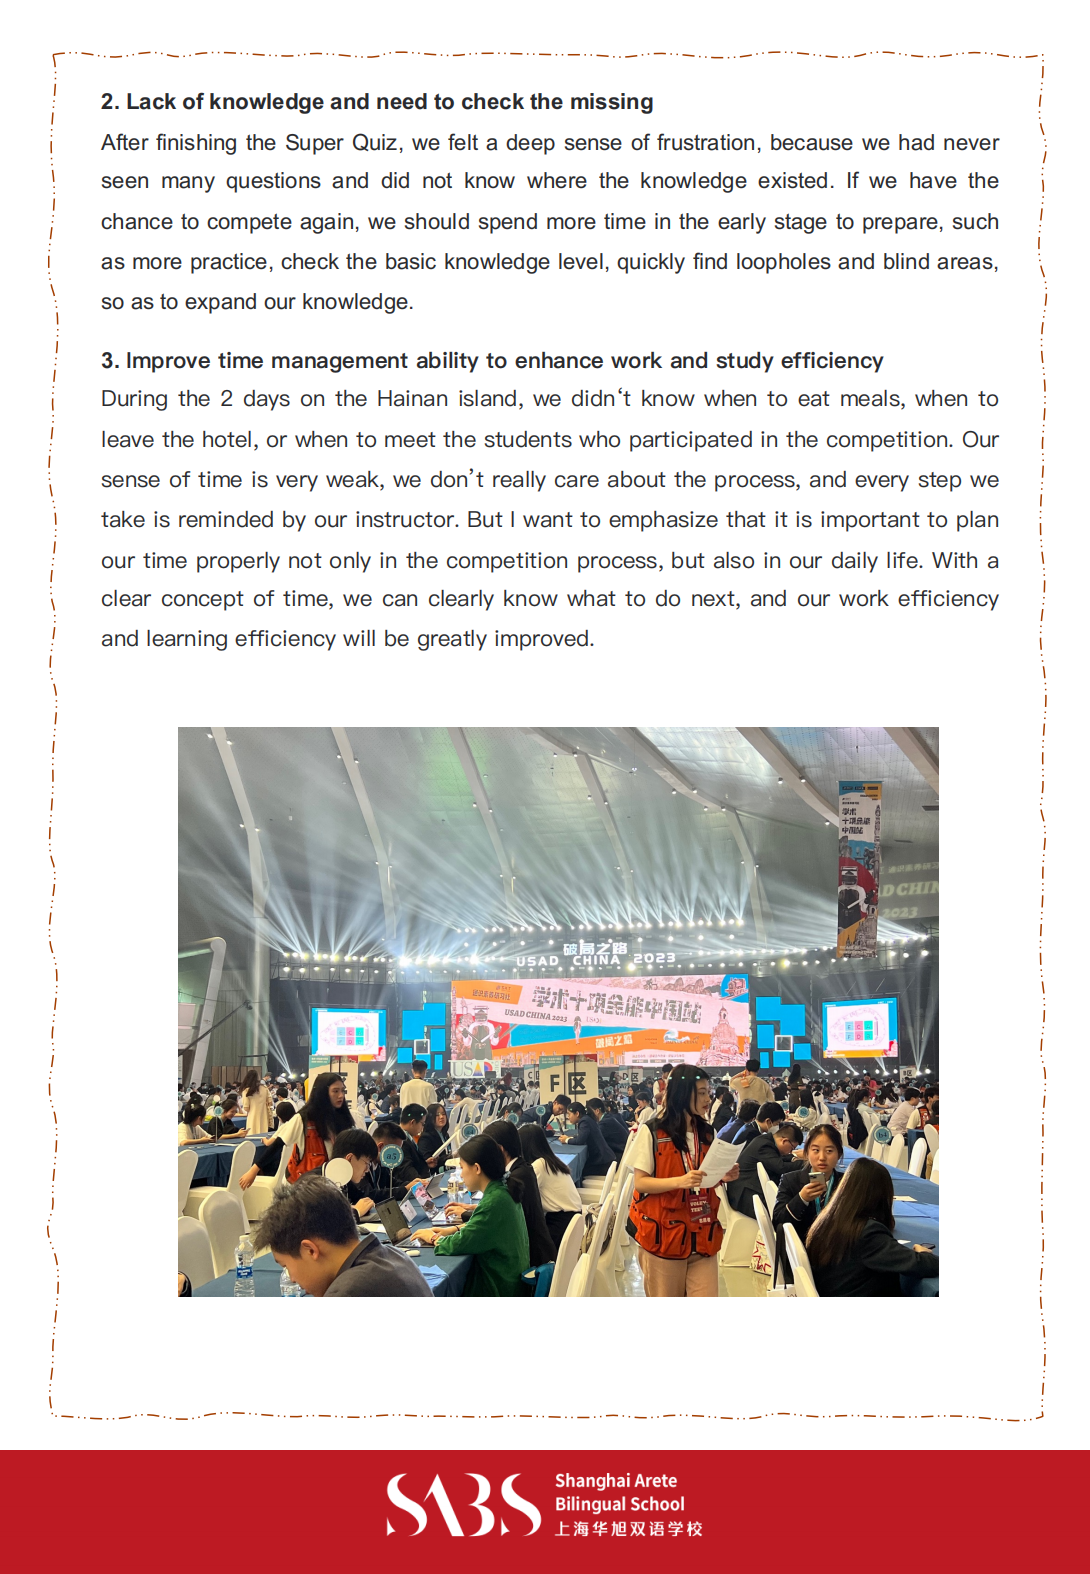 HS 4th Issue Newsletter pptx（English）_18.png